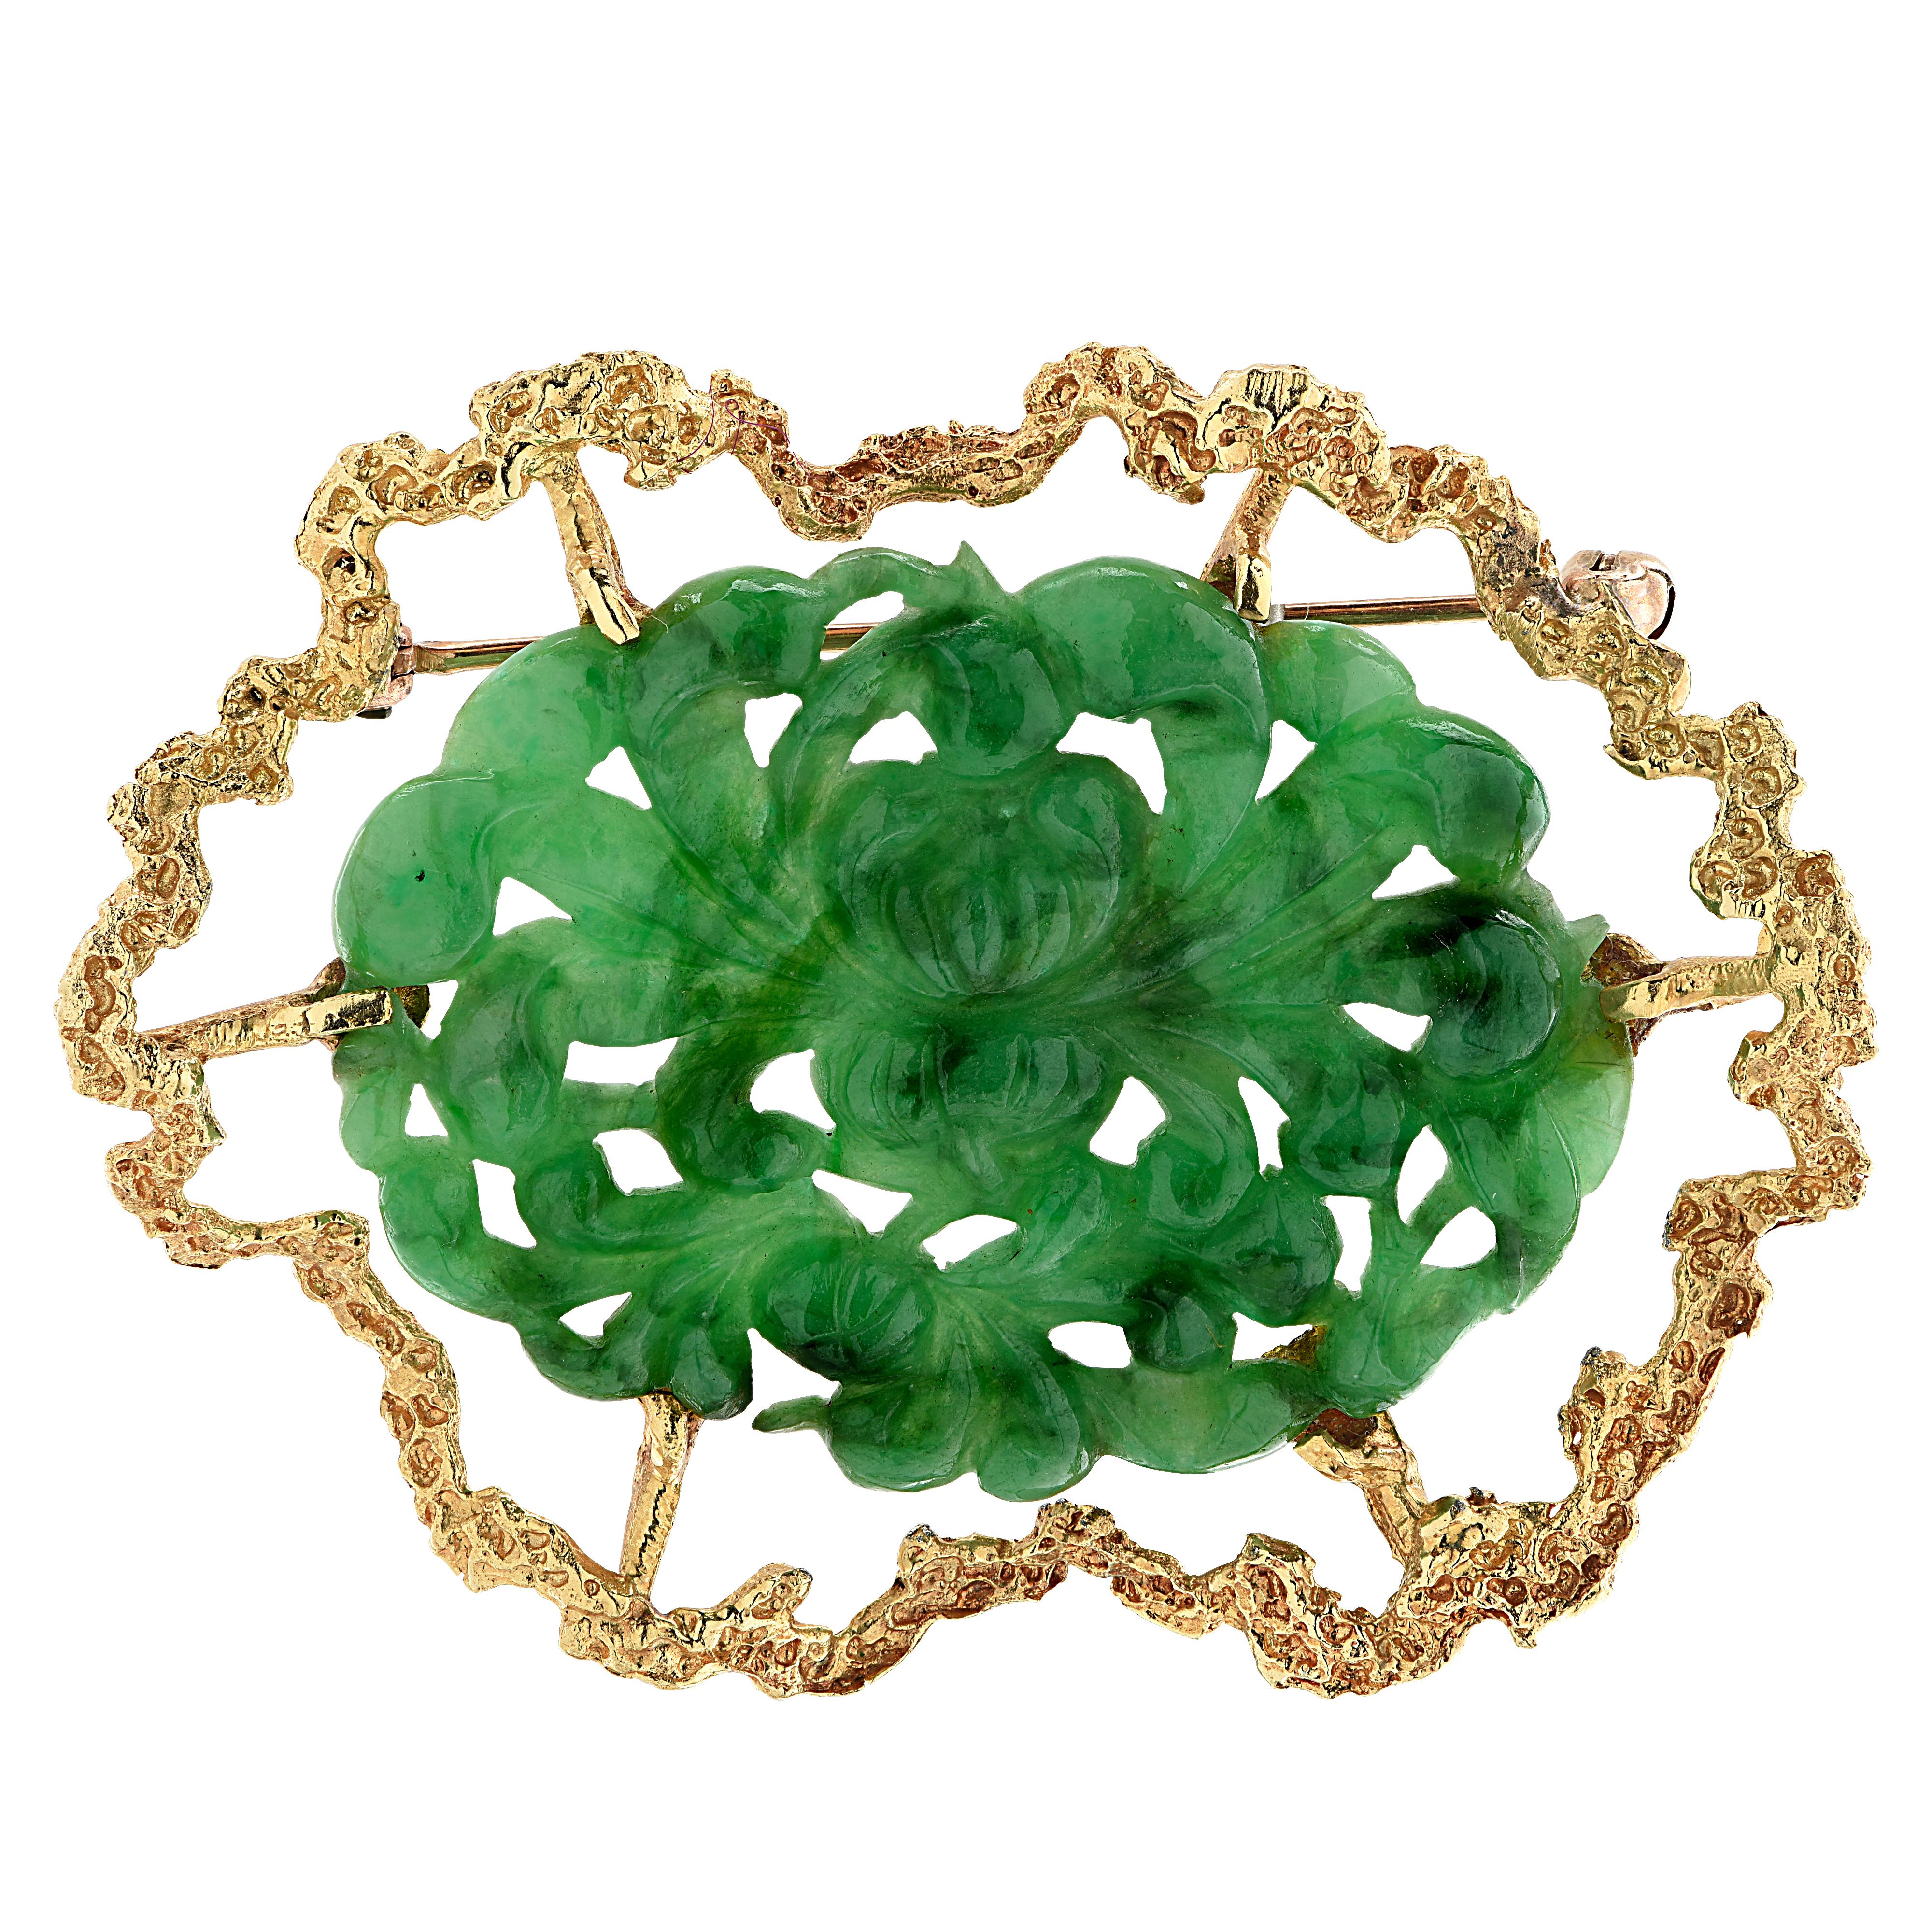 Spectacular brooch pin crafted in yellow gold showcasing a jade carving. The brooch pin measures 1.5 inches in length and 1.9 inches in width. It weighs 10.8 grams.

Our pieces are all accompanied by an appraisal performed by one of our in-house GIA